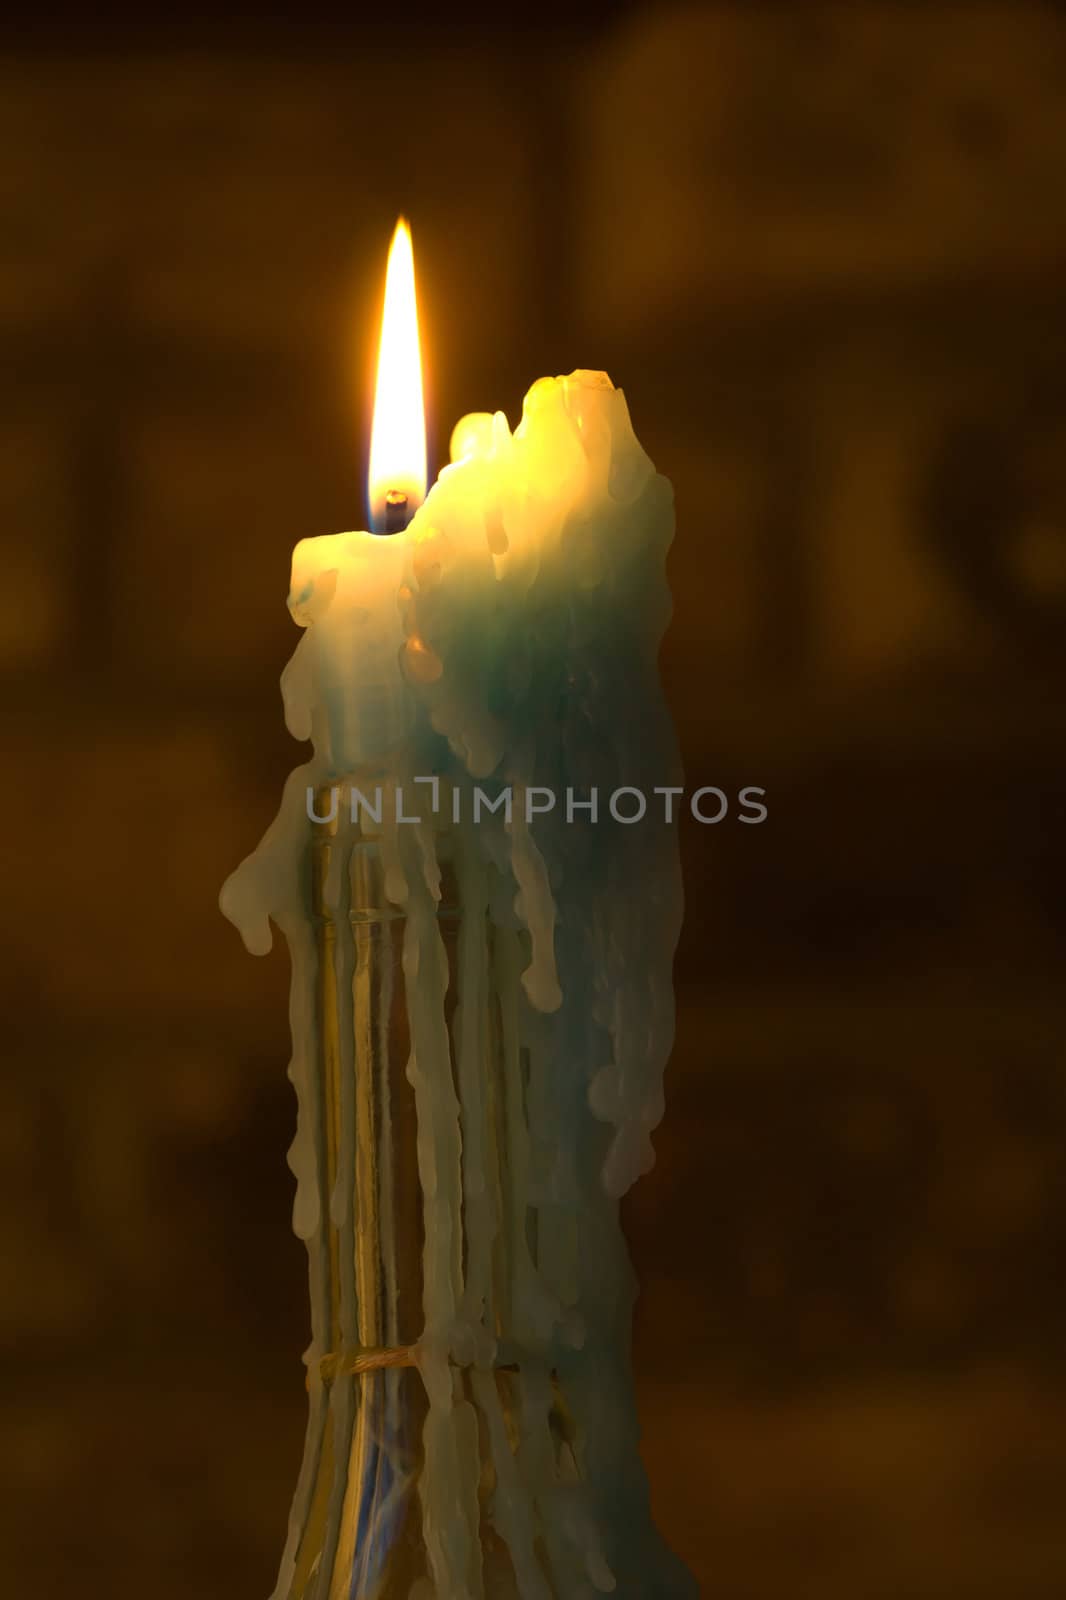 A candle burns in a bottle with a wax build up.